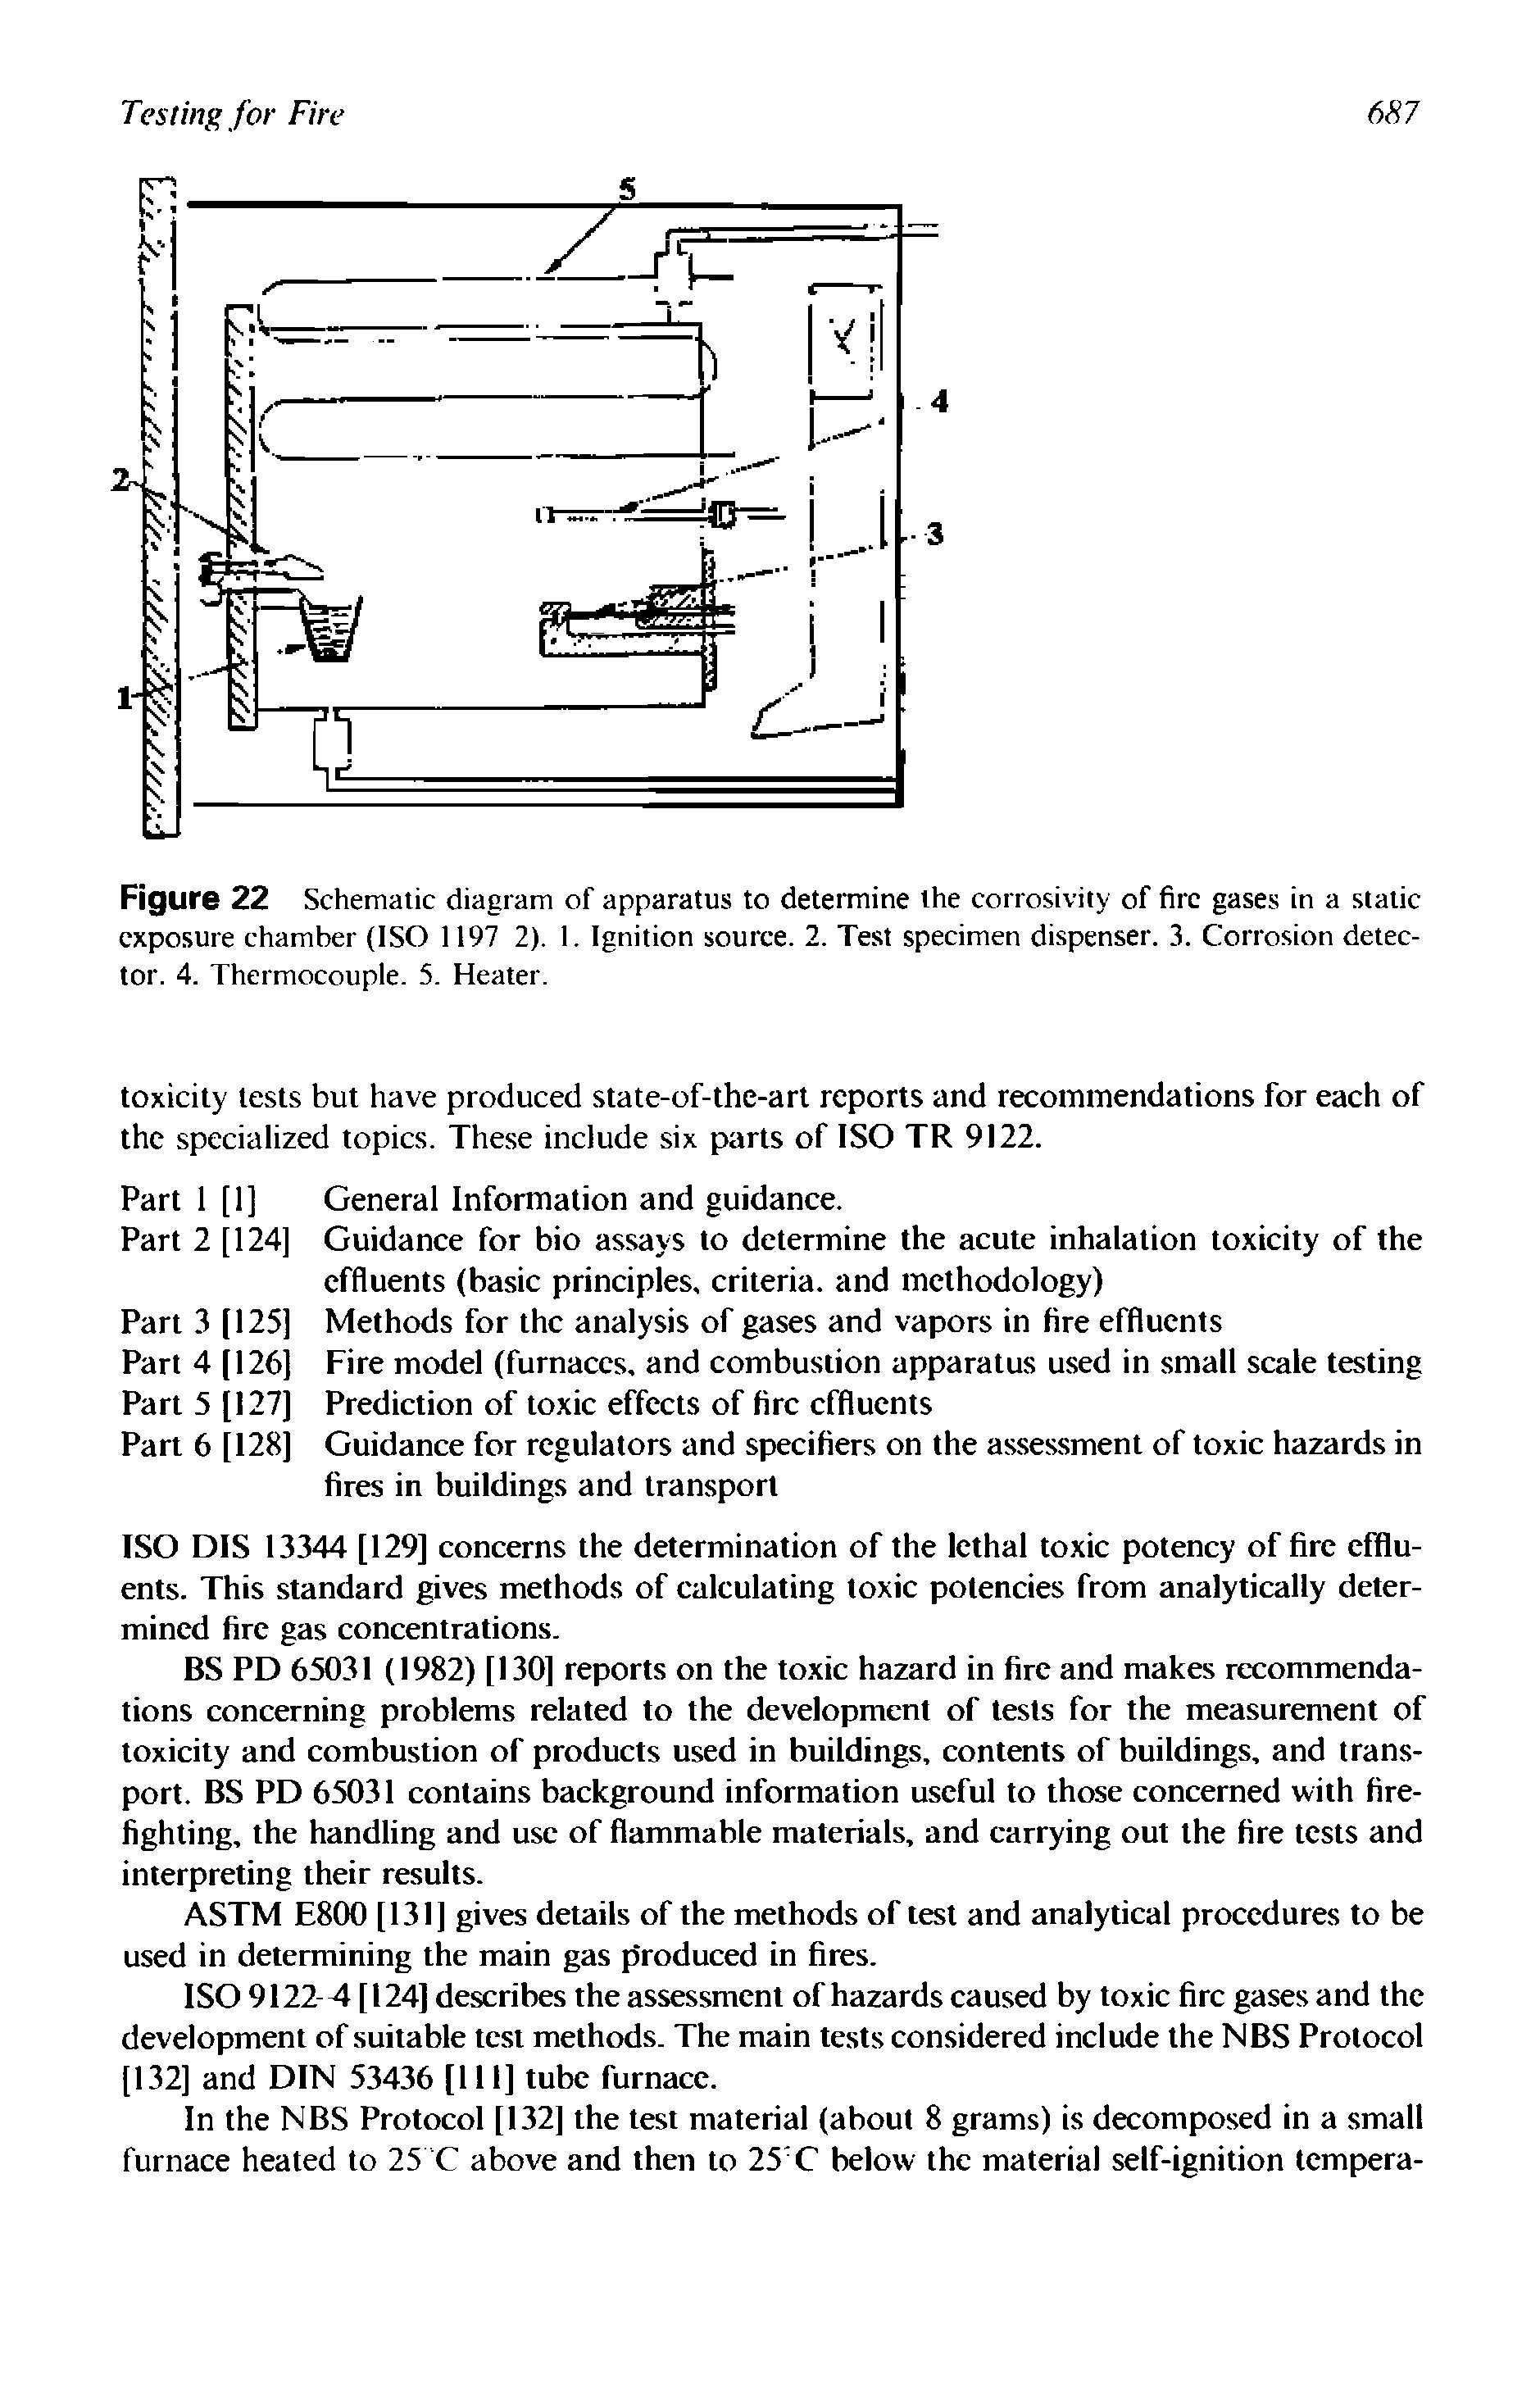 Figure 22 Schematic diagram of apparatus to determine the corrosivity of fire gases in a static exposure chamber (ISO 1197 2). 1. Ignition source. 2. Test specimen dispenser. 3. Corrosion detector. 4. Thermocouple. 5. Heater.